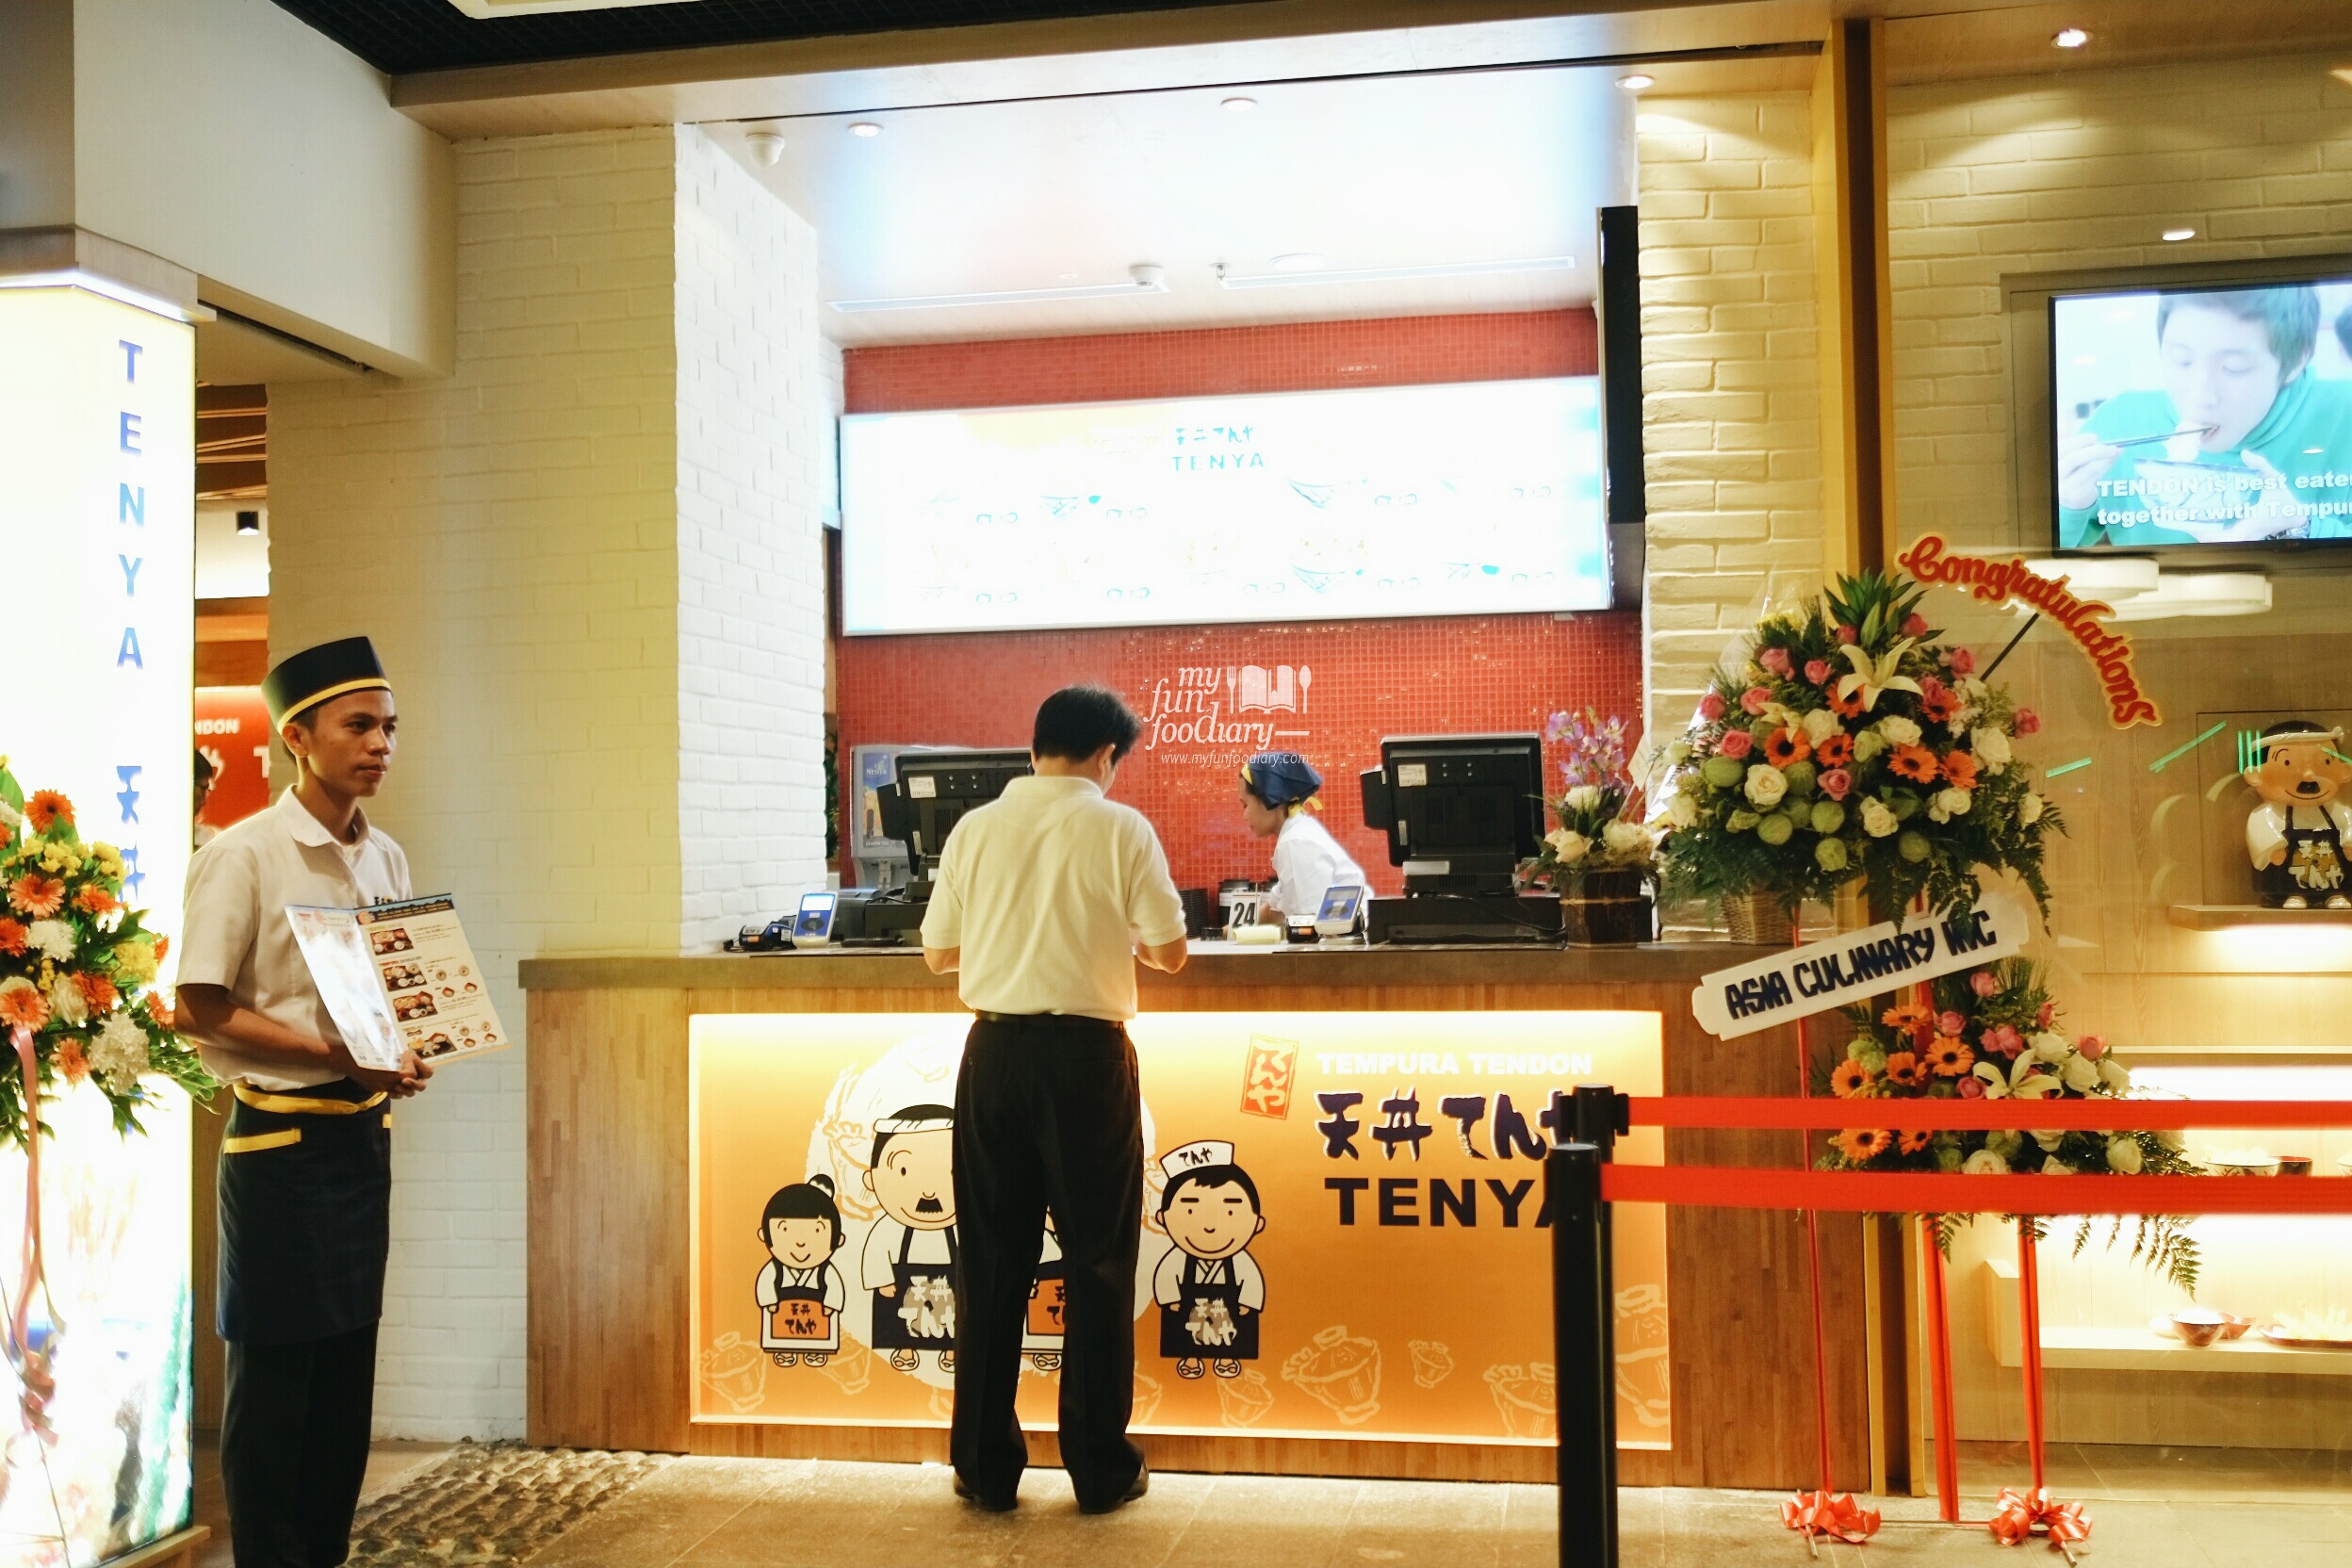 Order at the Cashier - at Tenya Tendon Grand Indonesia by Myfunfoodiary